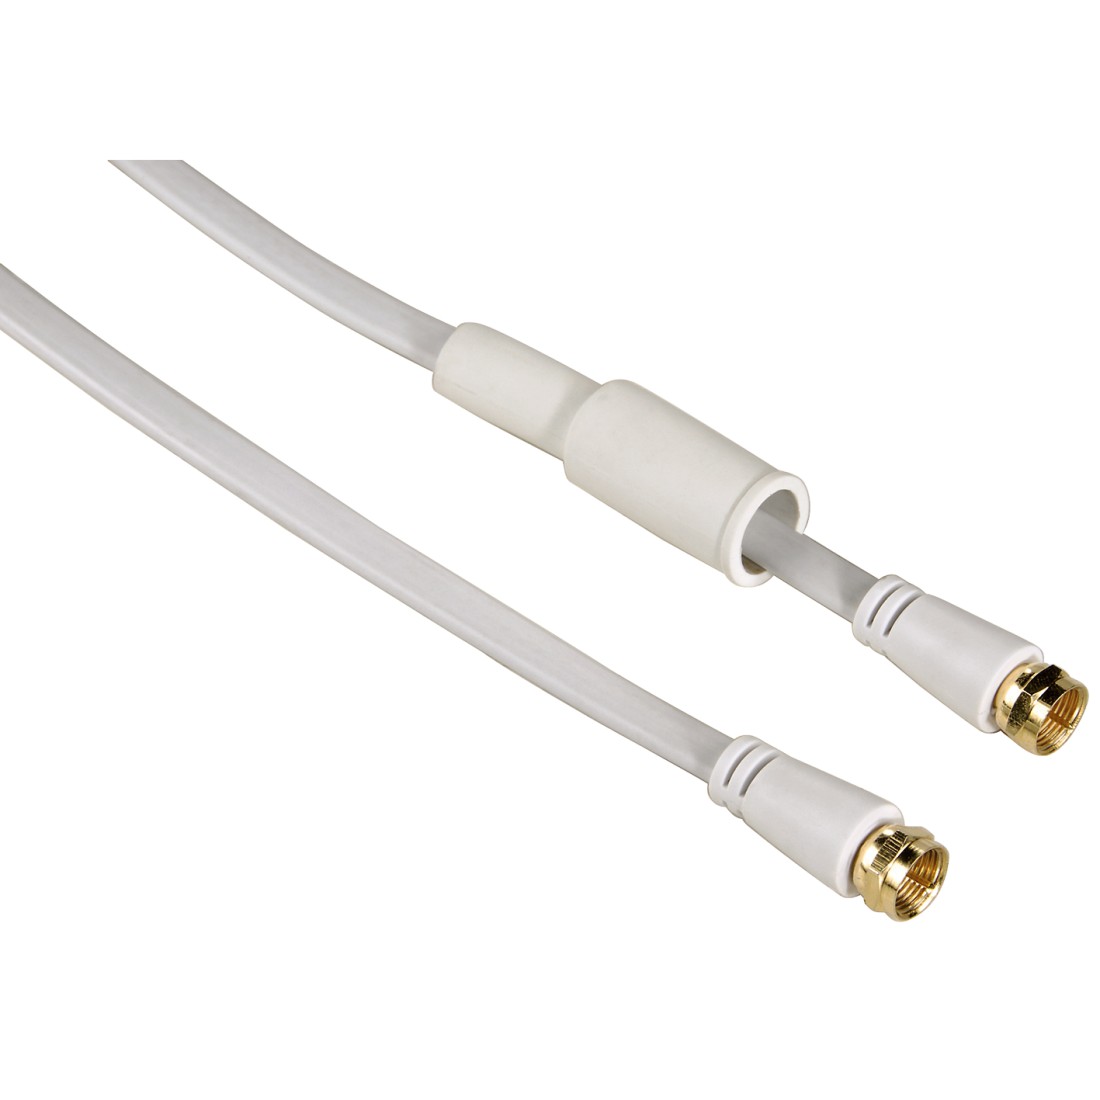 10 F-Connectors PremiumX 100m Satellite Coaxial Cable 135dB 4x Shielding Digital Sat Aerial Antenna Cable 4K 1080p FULL HD HDTV